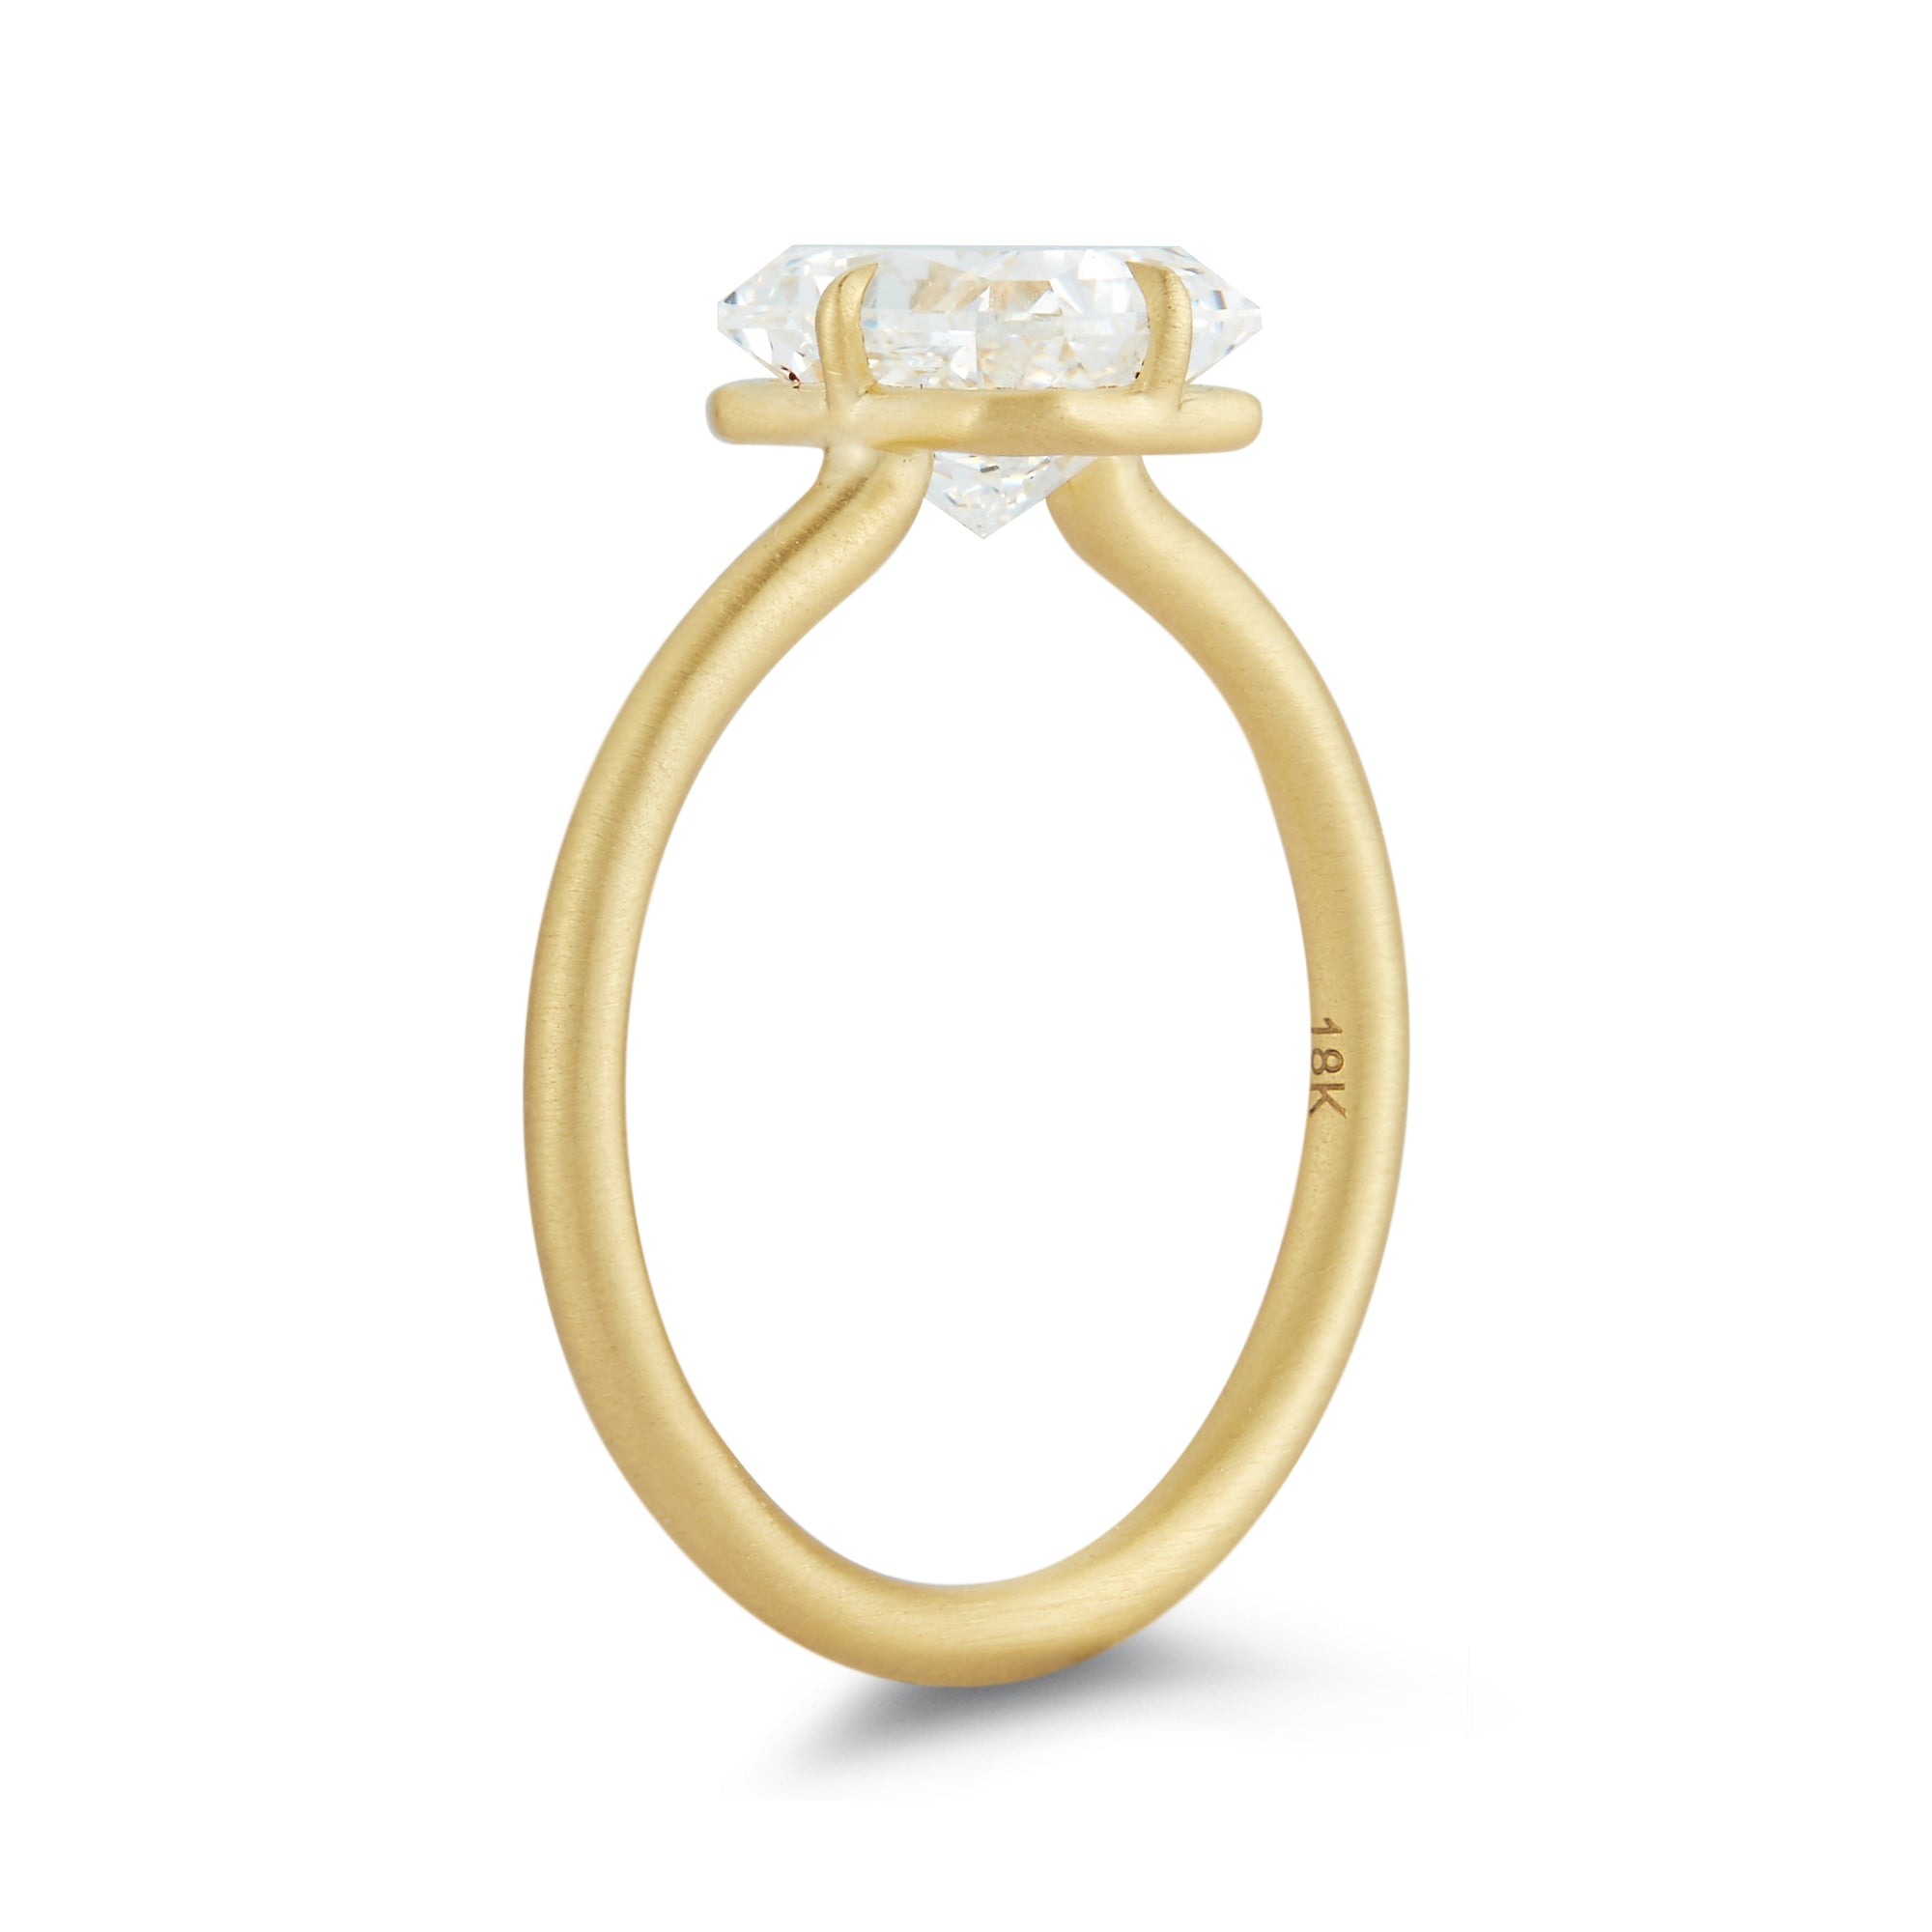 modern solitaire diamond engagement ring in solid yellow gold band by finn by candice pool neistat